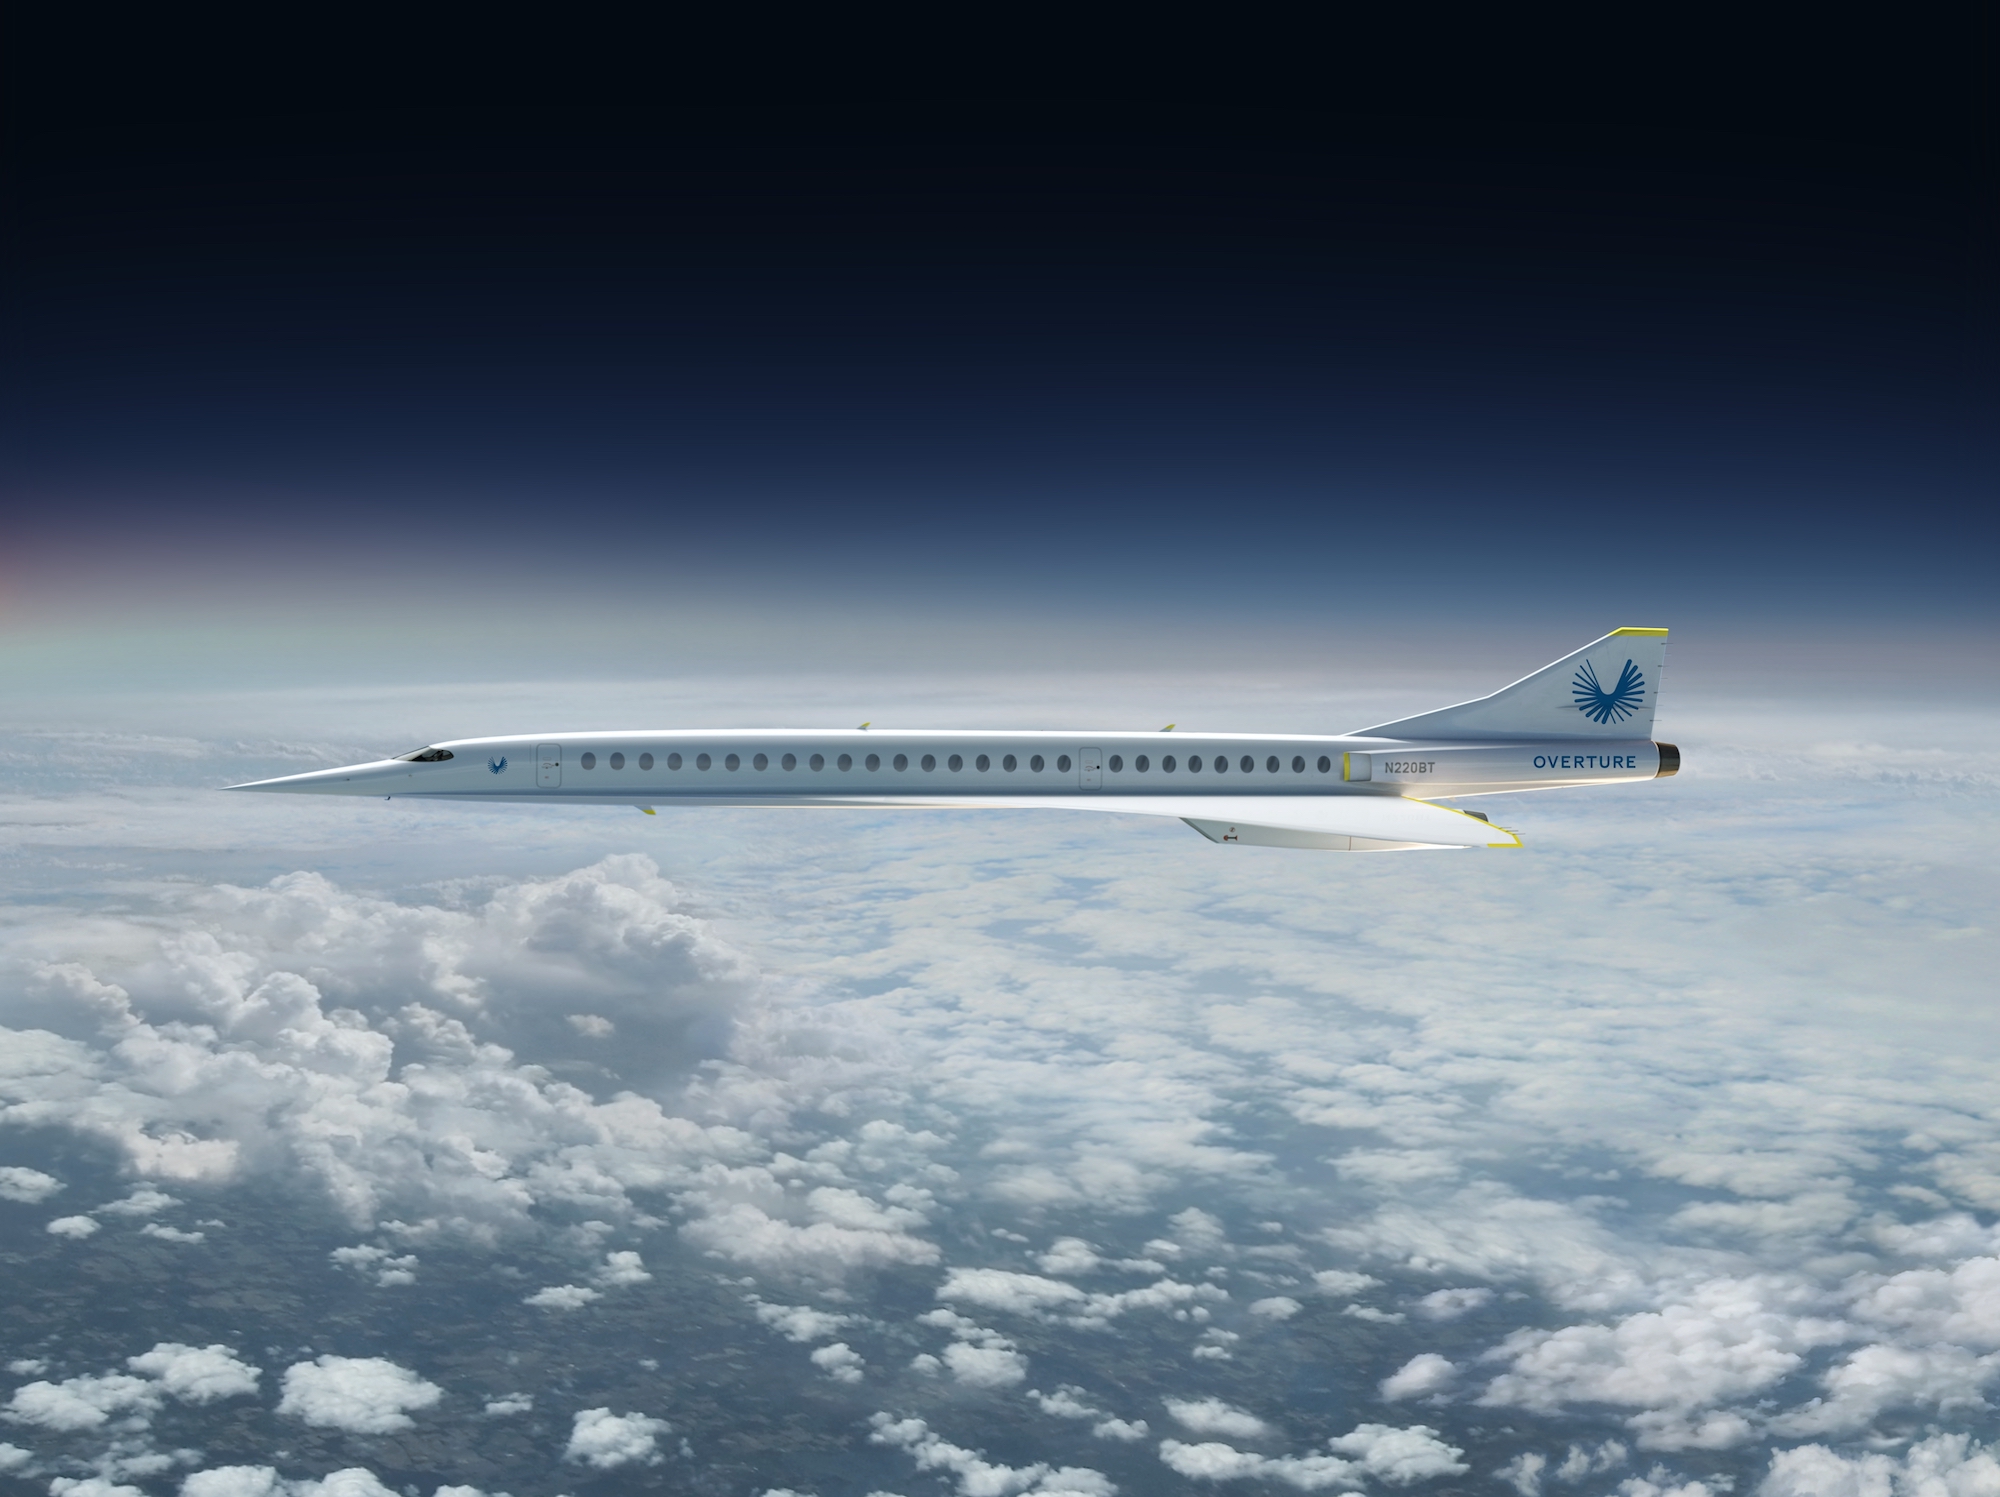 The Air Force is investing millions in what could be the next Concorde